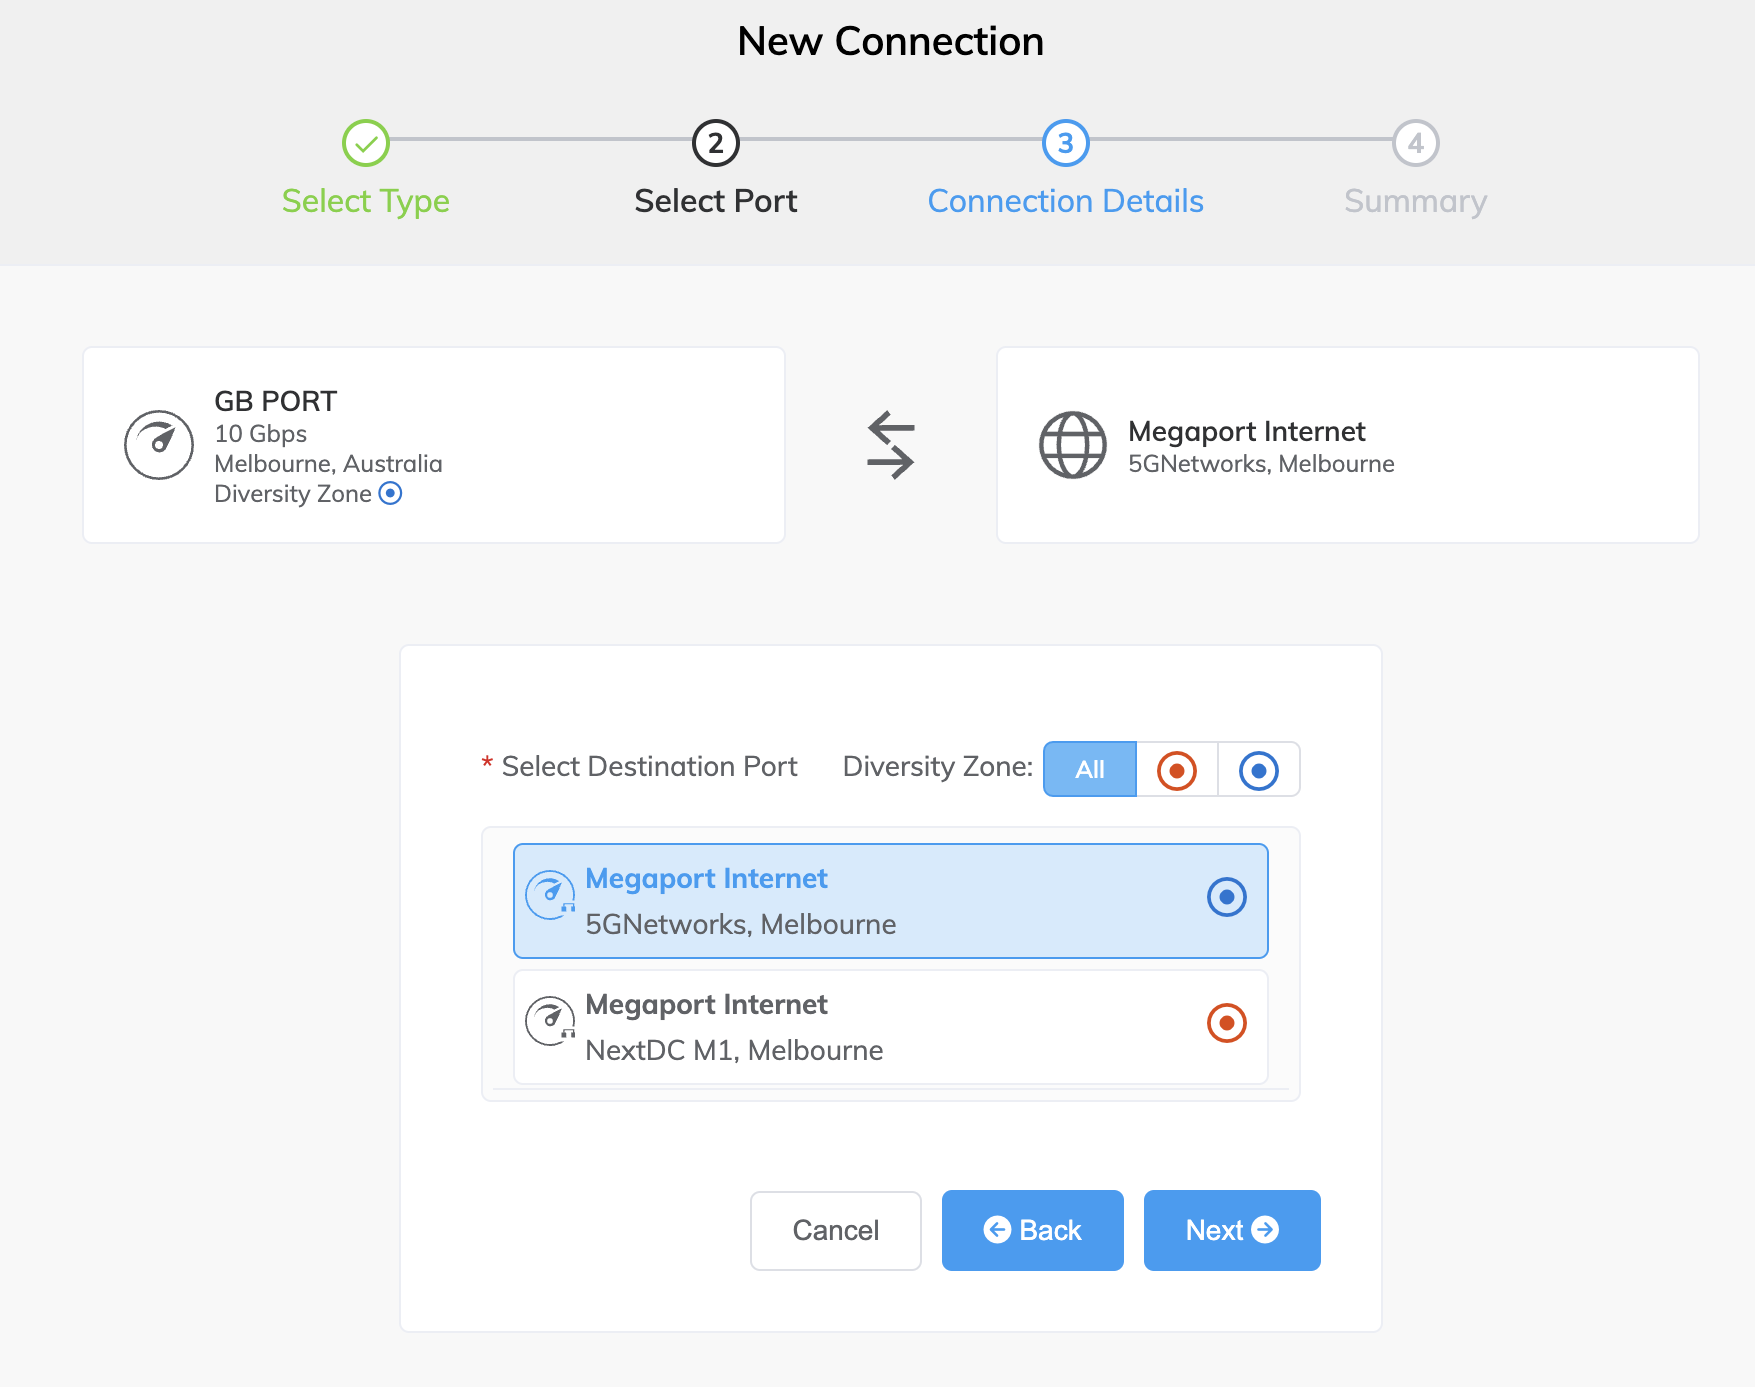 Select the B-End or IP Transit router for the Megaport Internet connection